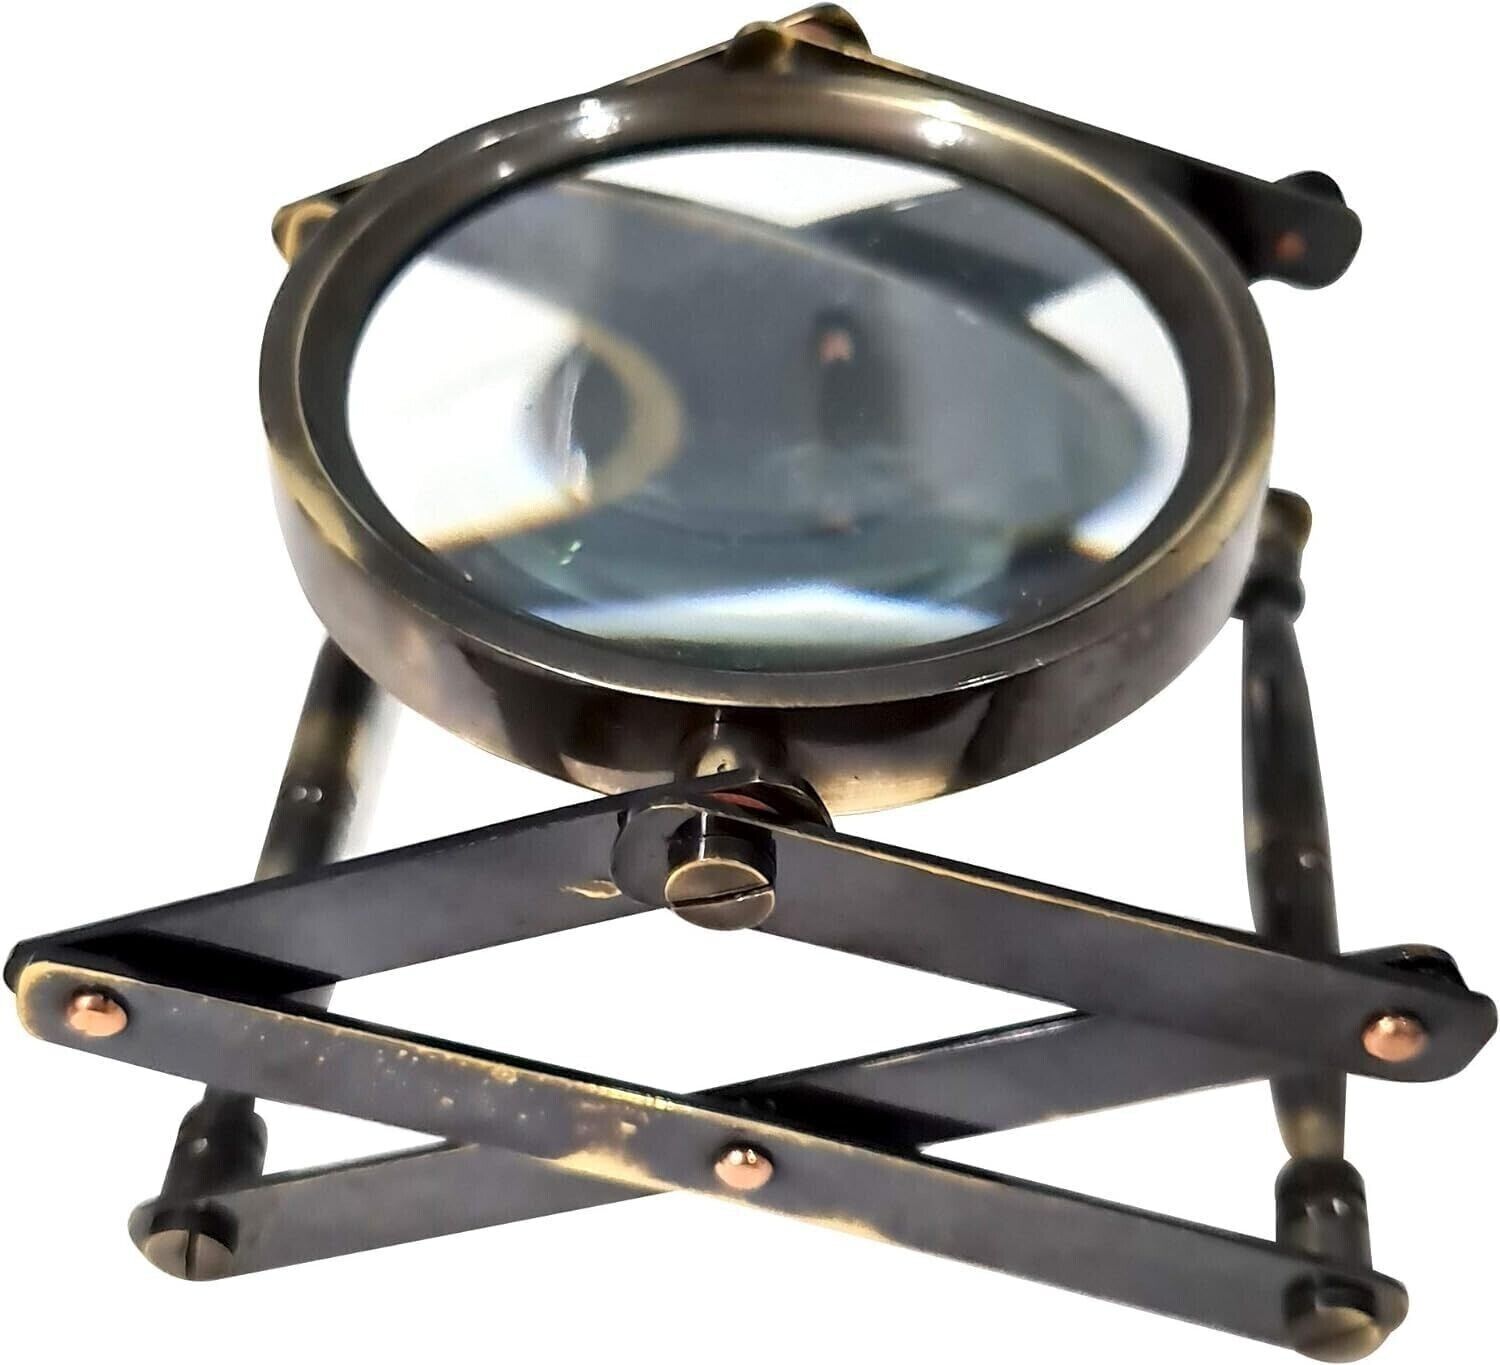 This antique brass magnifying glass is a unique and exquisite desktop collectib